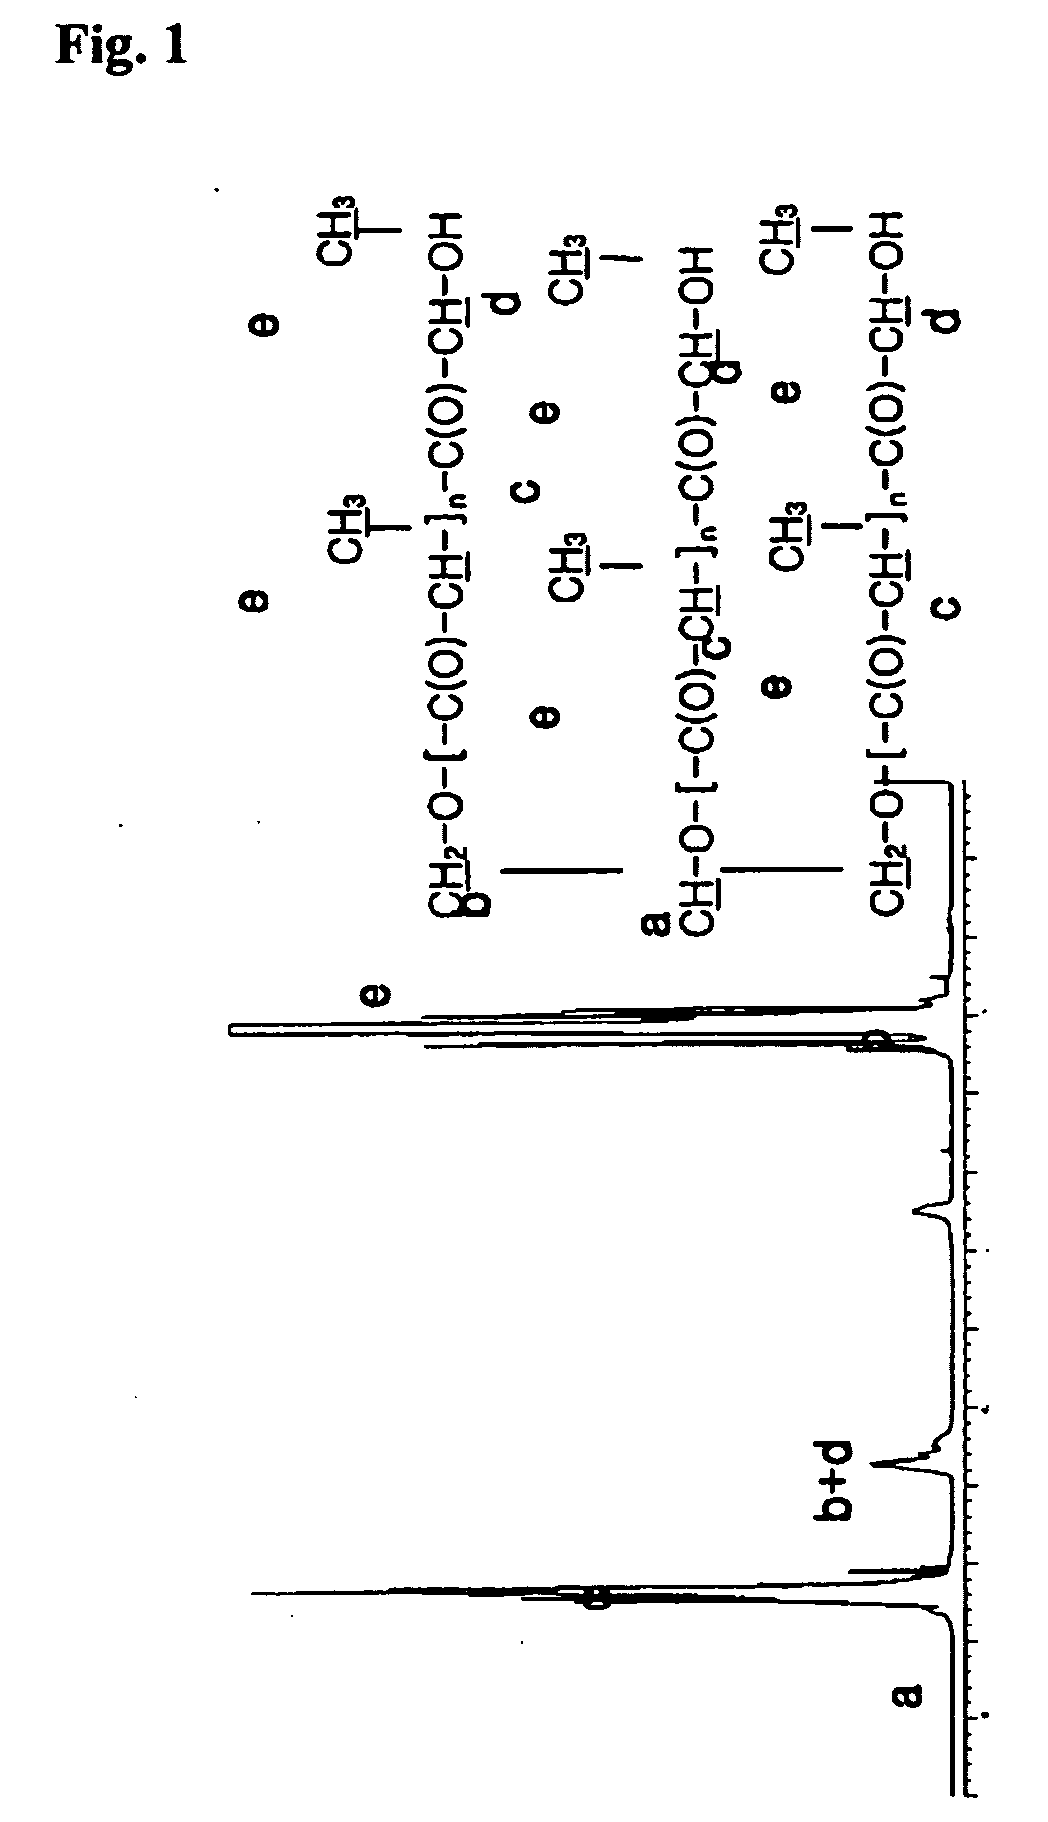 Biodegradable branched polylactide derivatives capable of forming polymeric micelles, and their preparation method and use